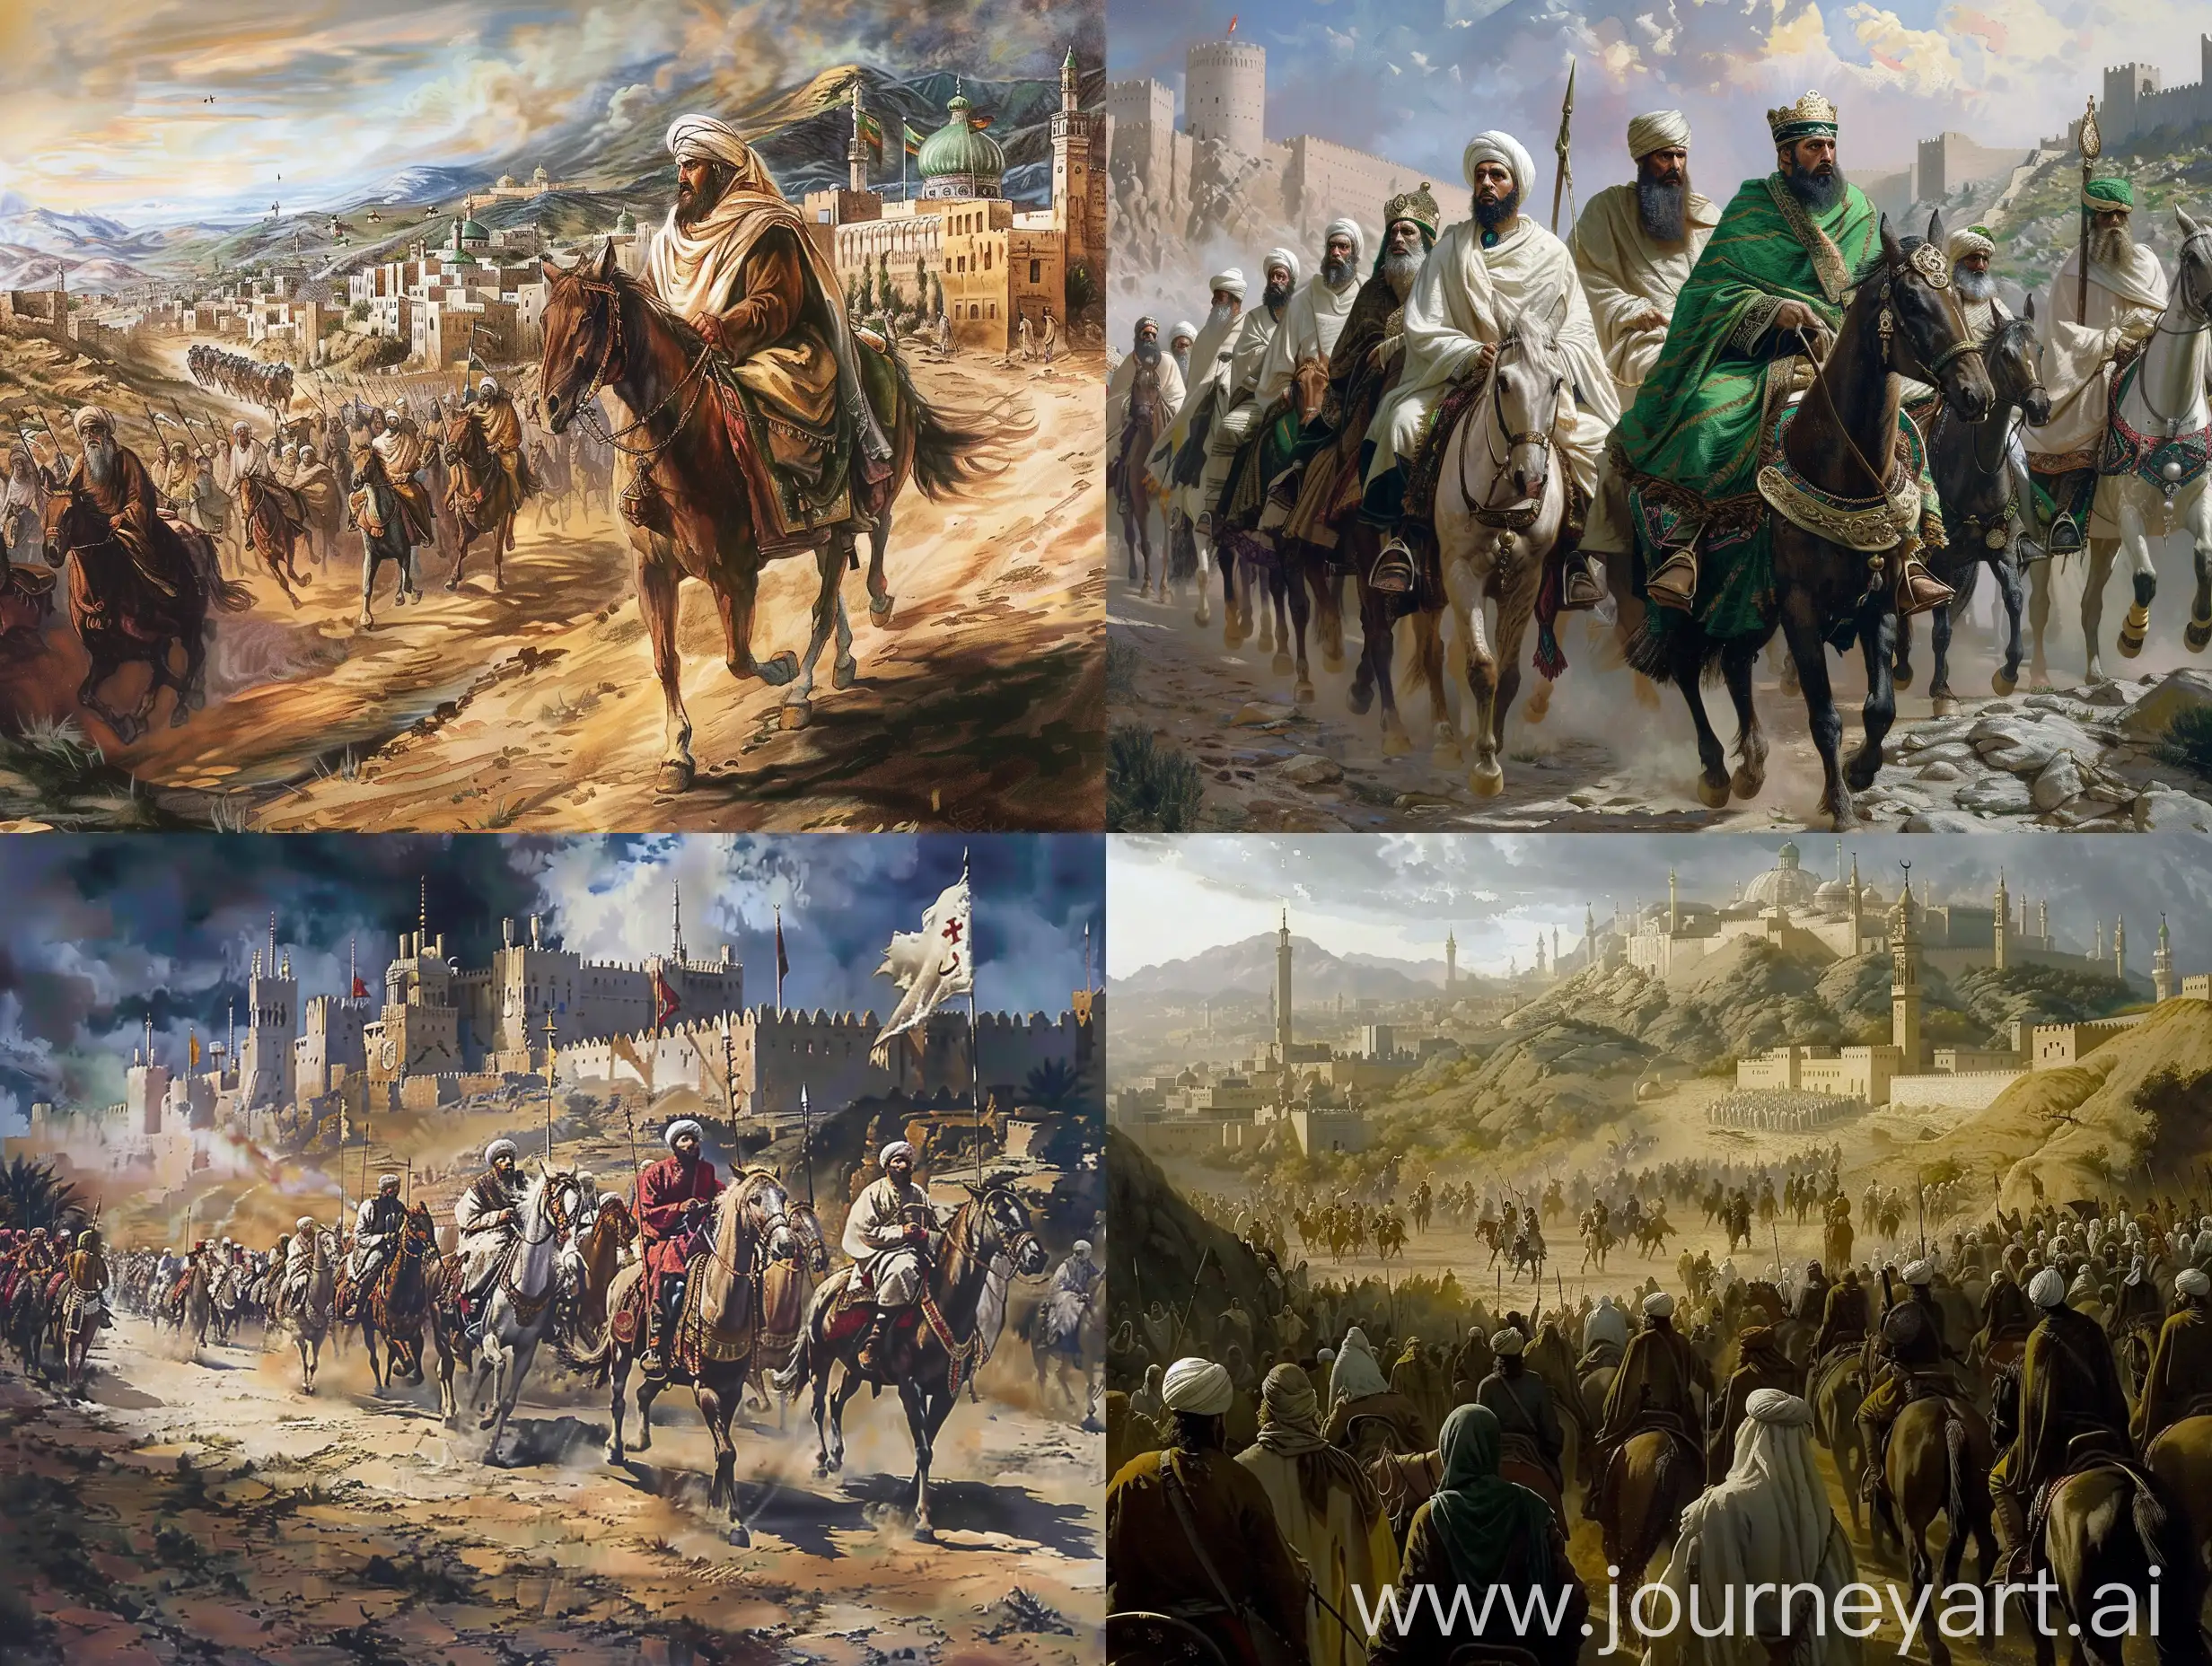 High quality. Prophet Muhammad's migration from Mecca to Medina led to an increase in the political and military power of Islam. During the Medinan period, Muslims fought many wars for both defense and conquest. The battles of Badr, Uhud and Trench are among the important military conflicts of this period. The Four Caliph period draws attention with the spread of Islam beyond the Arabian Peninsula to a wide geography such as Syria, Iraq, Egypt and Iran. These conquests enabled Islam to grow rapidly and become influential in a wide area.